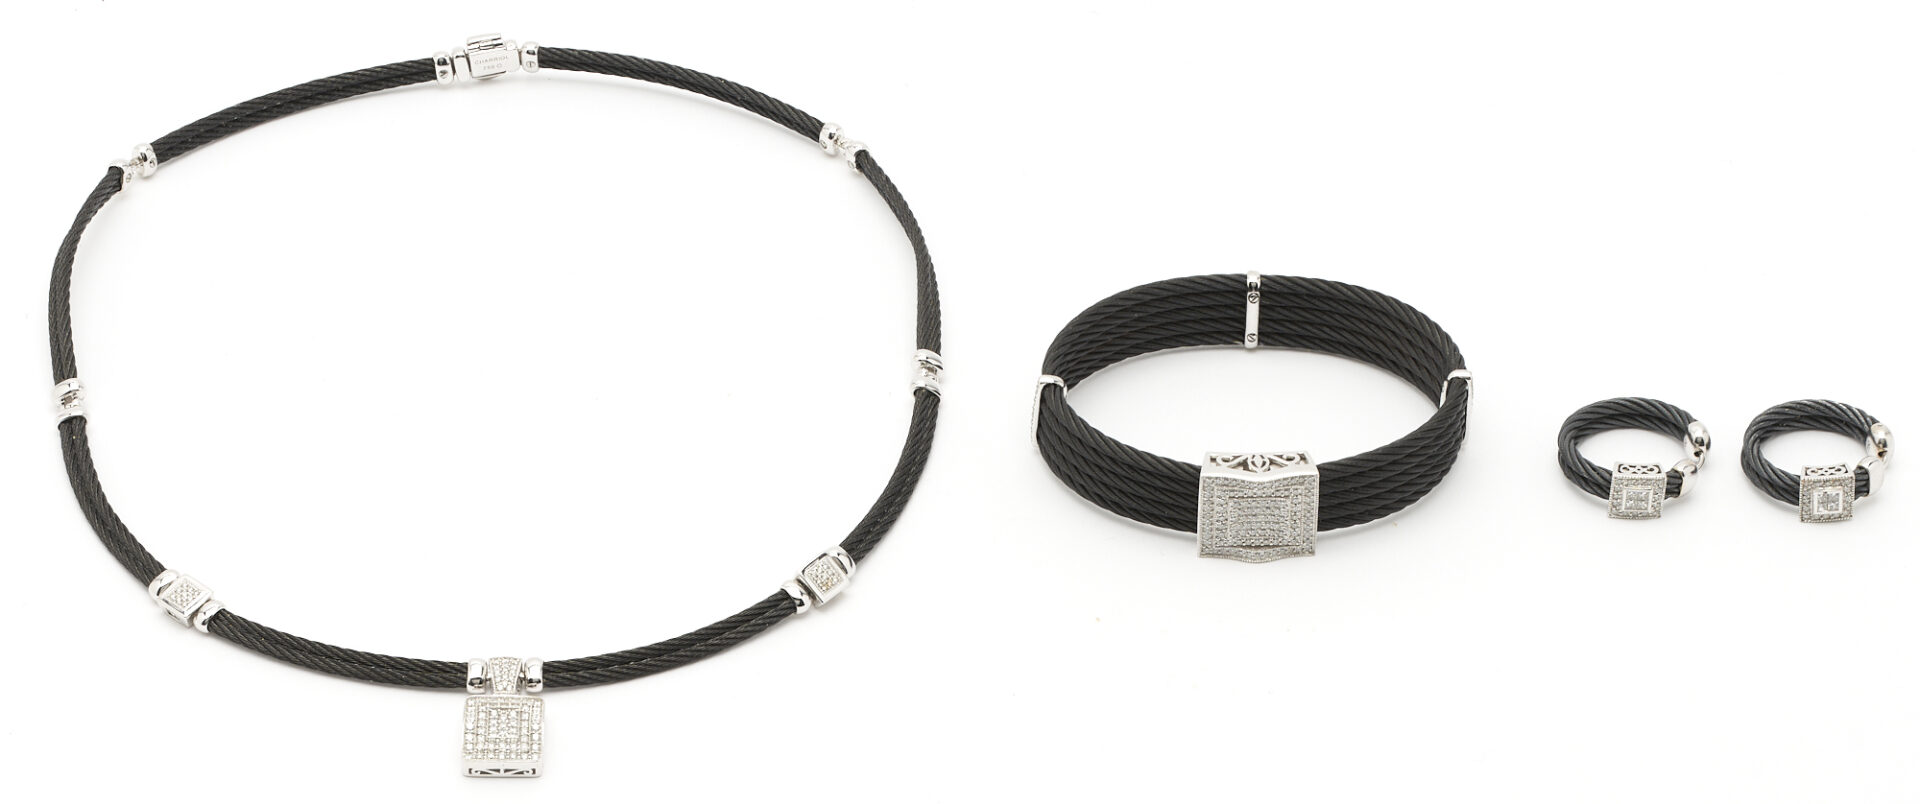 Lot 268: 18K, Diamond, & Black Cable Necklace, Bracelet, and Earrings by Charriol